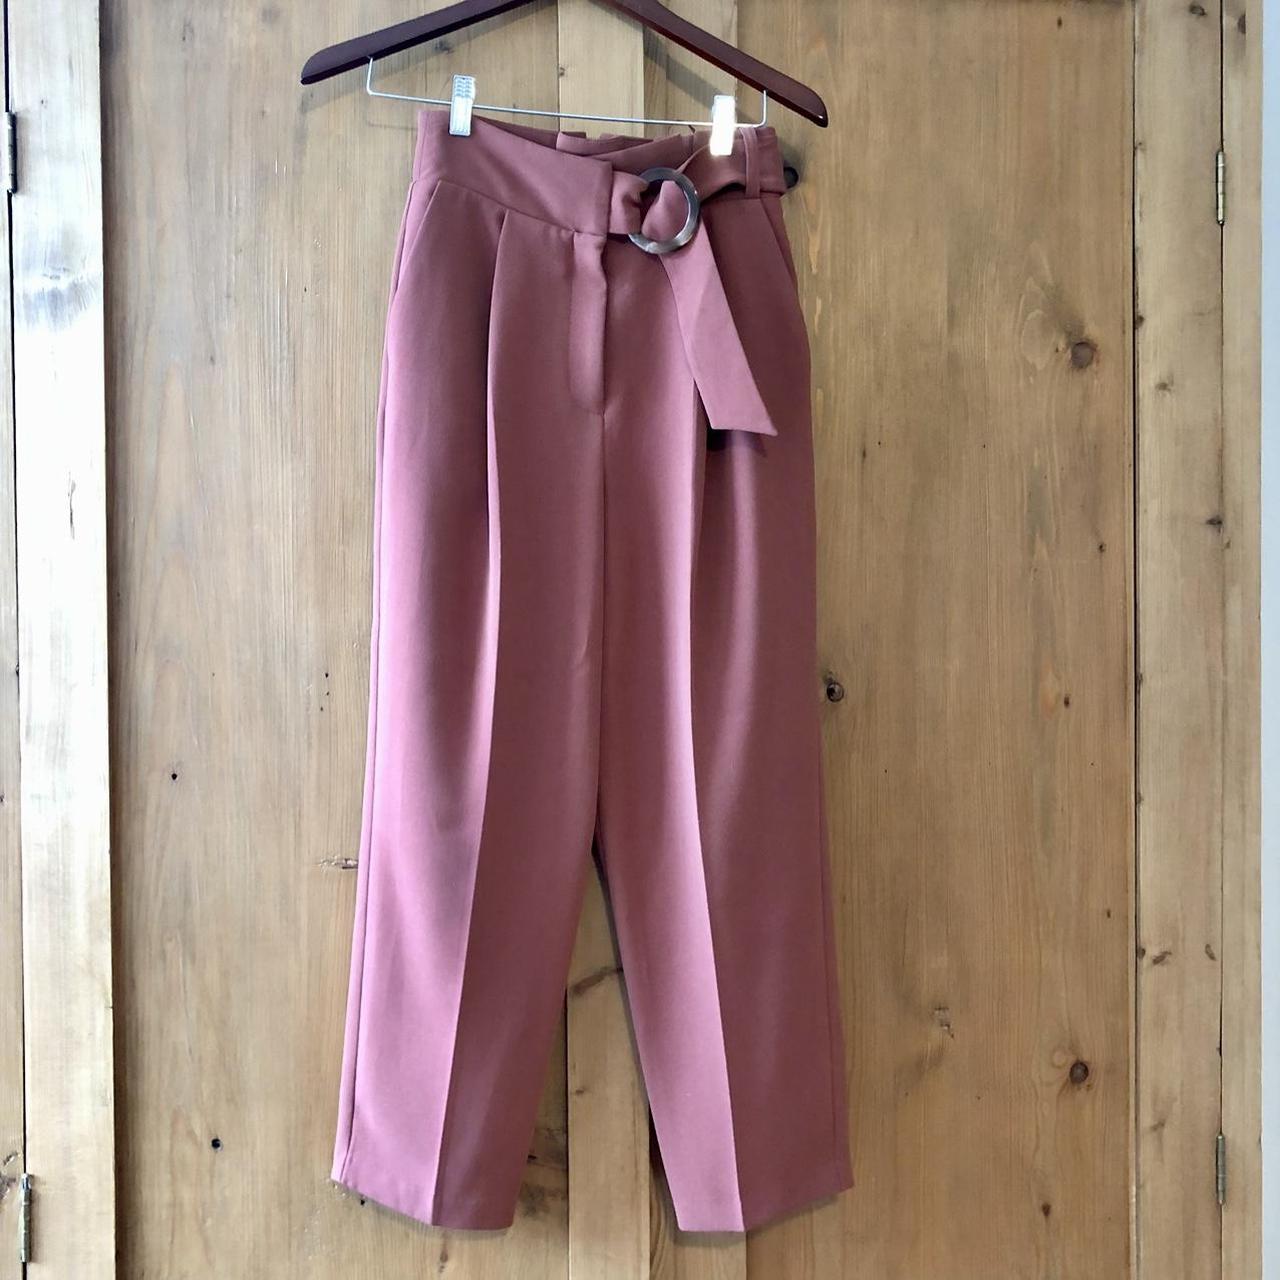 Topshop Pants & Leggings for Young Adult Women | Nordstrom